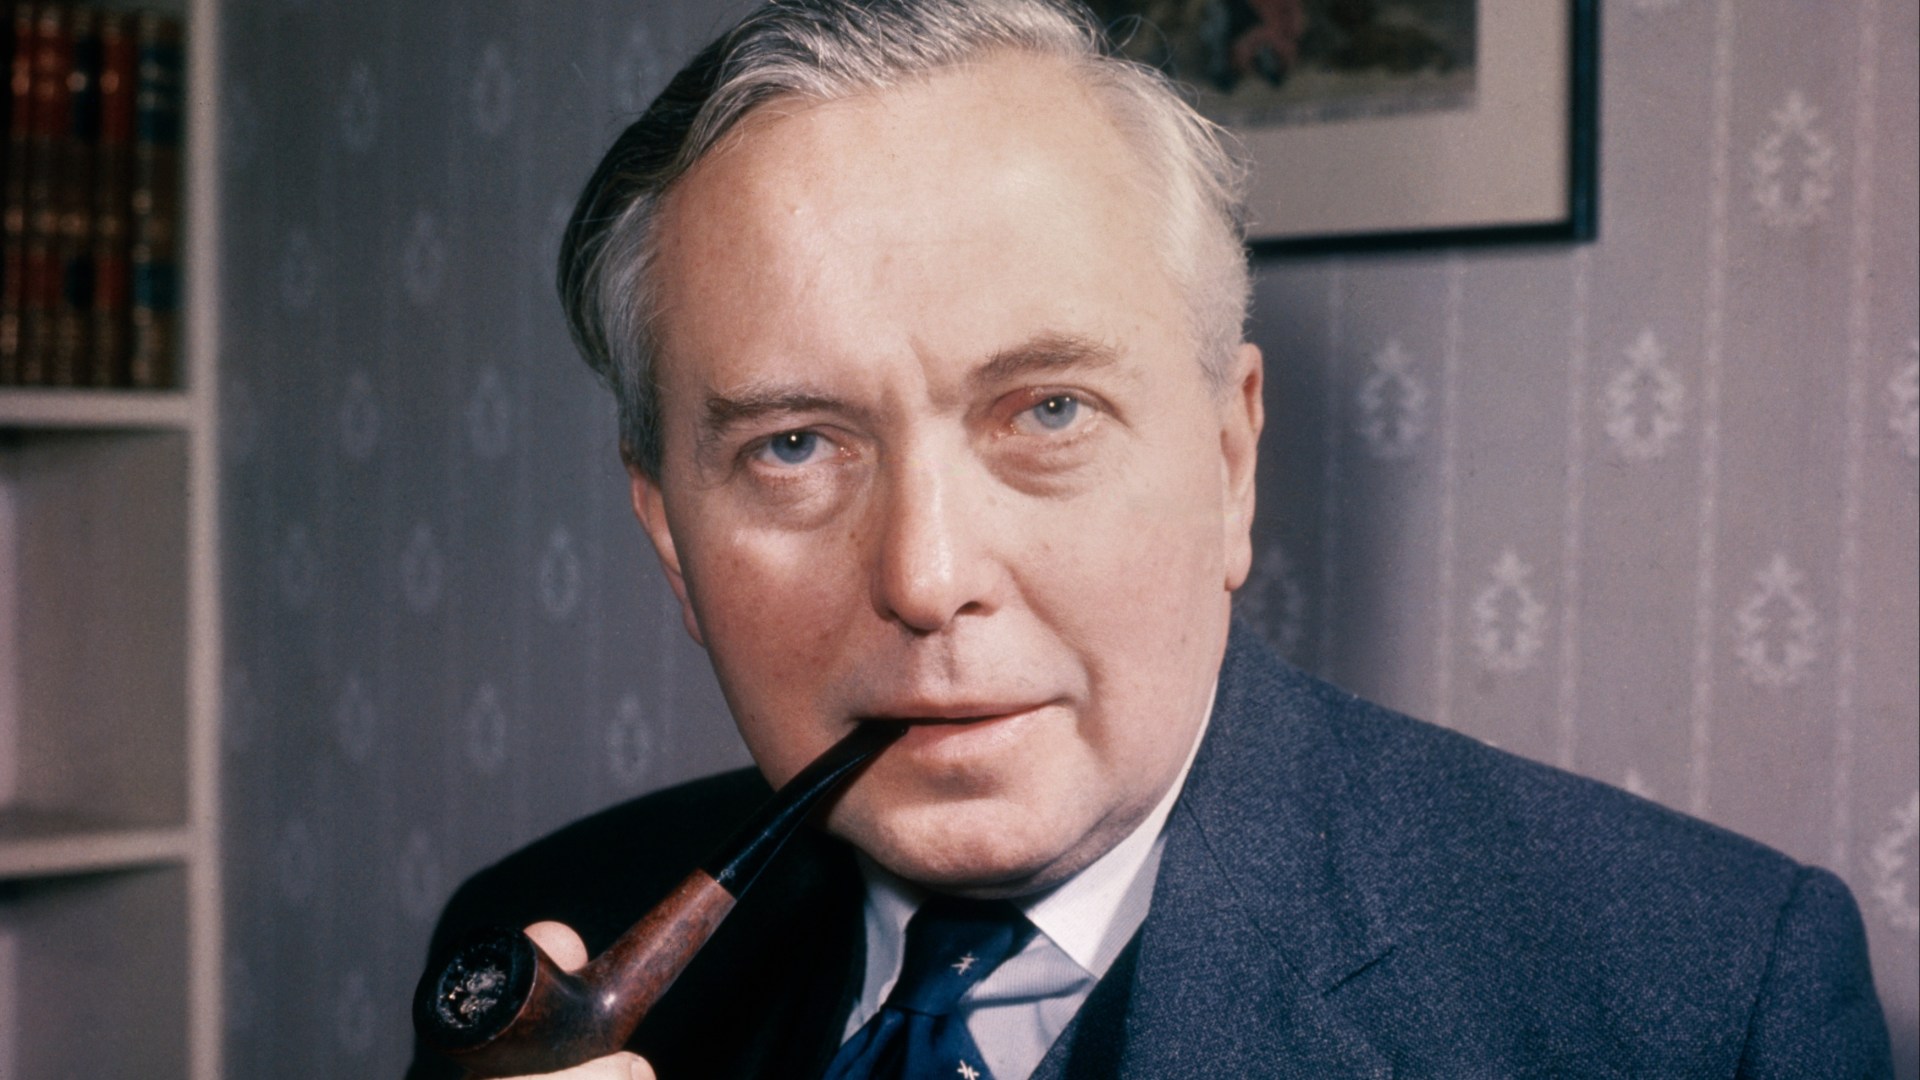 Exclusive: Scandalous Confession – Ex-Labour PM Harold Wilson Reveals Affair with Aide in Downing Street